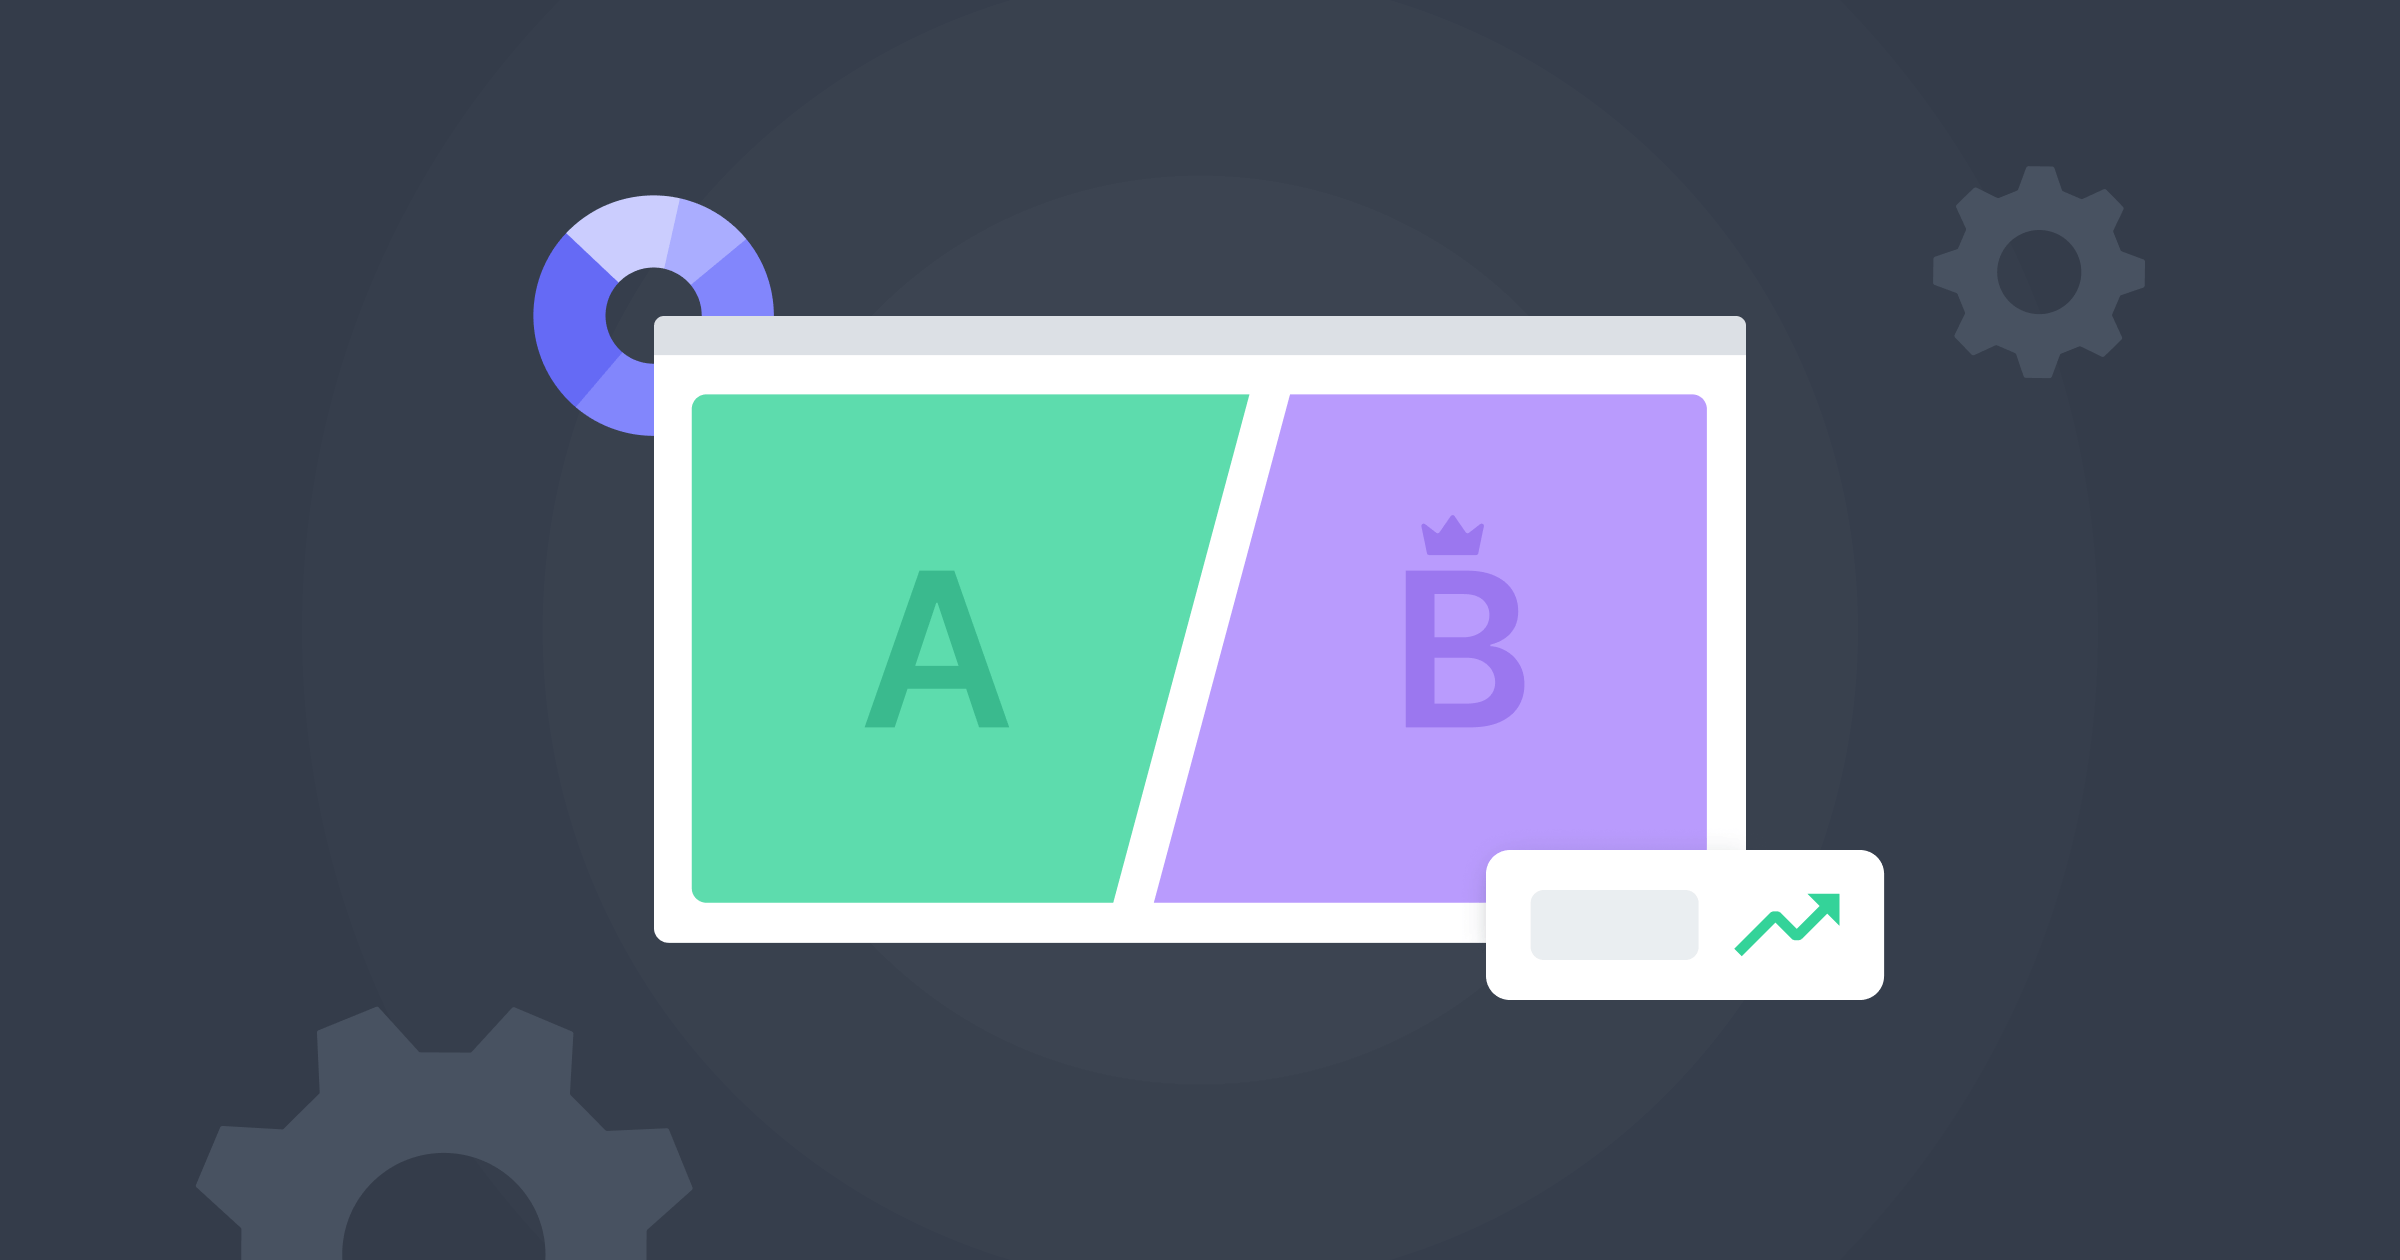 A website wireframe. The left side is green and has the letter A on it, and right side is purple and has the letter B on it. 